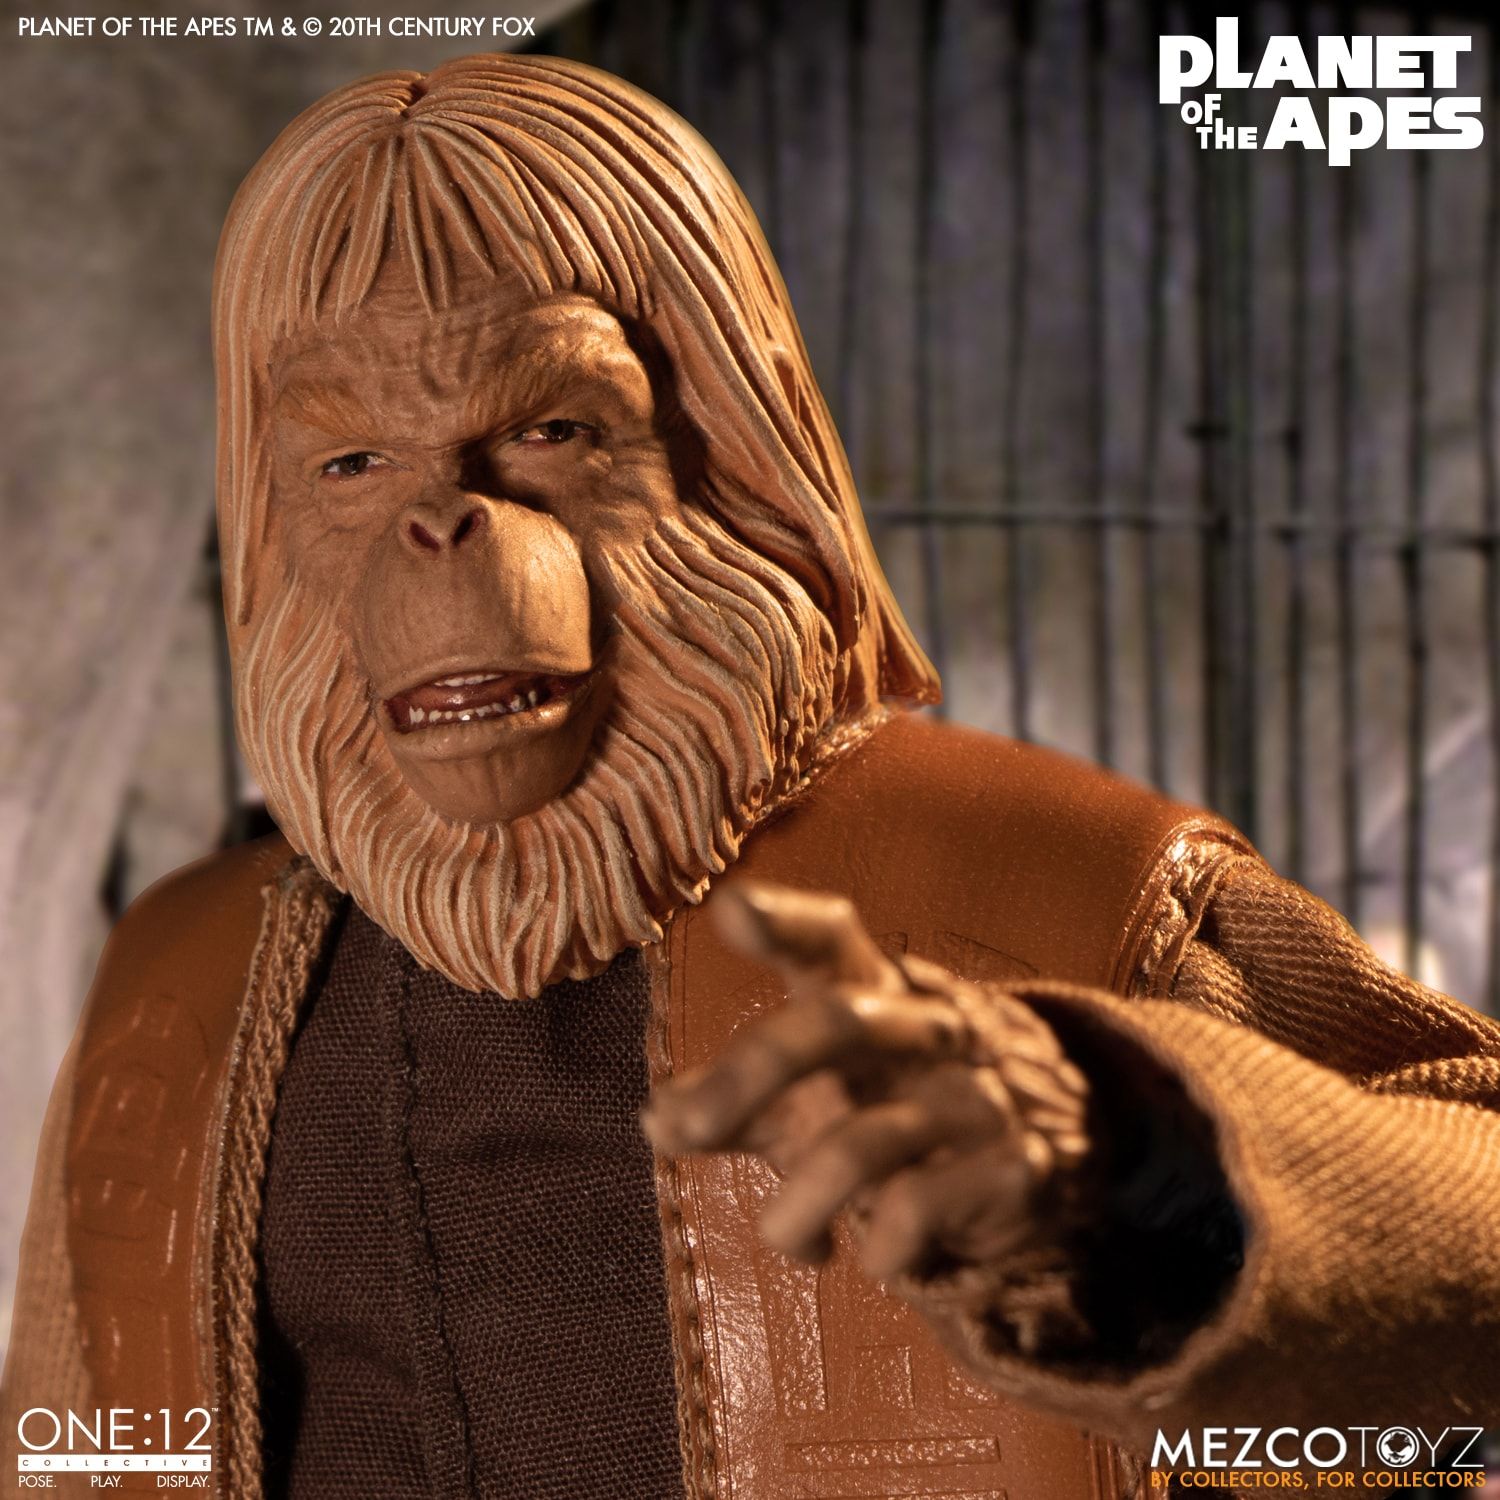 New Product: Mezco Planet of the Apes Dr. Zaius 8345